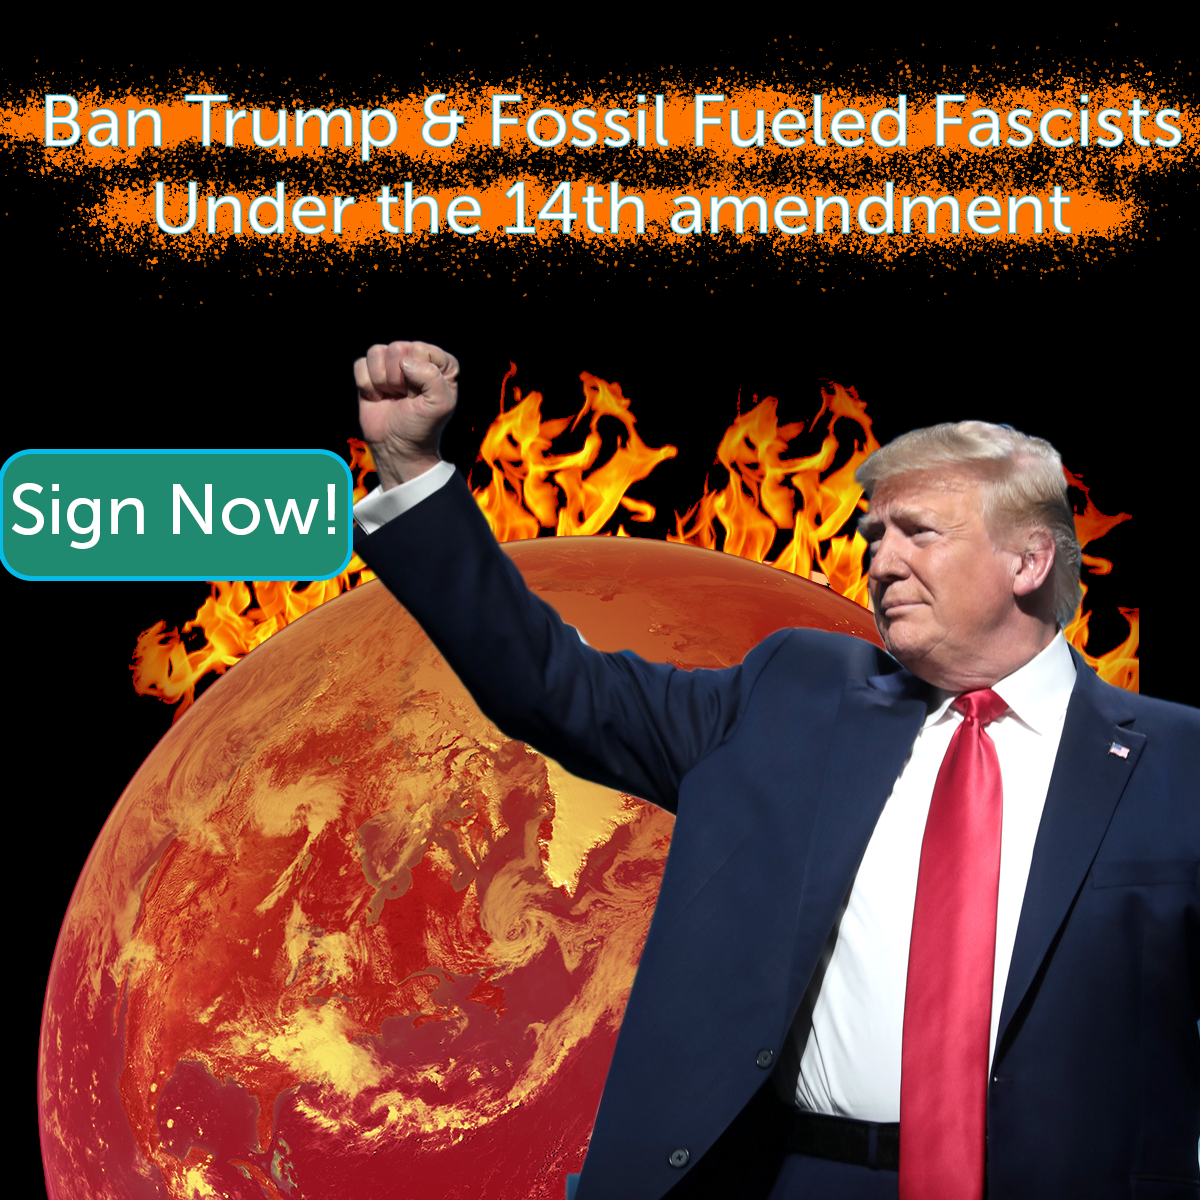 Ban Trump and all fossil fueled fascists under the 14th amendment